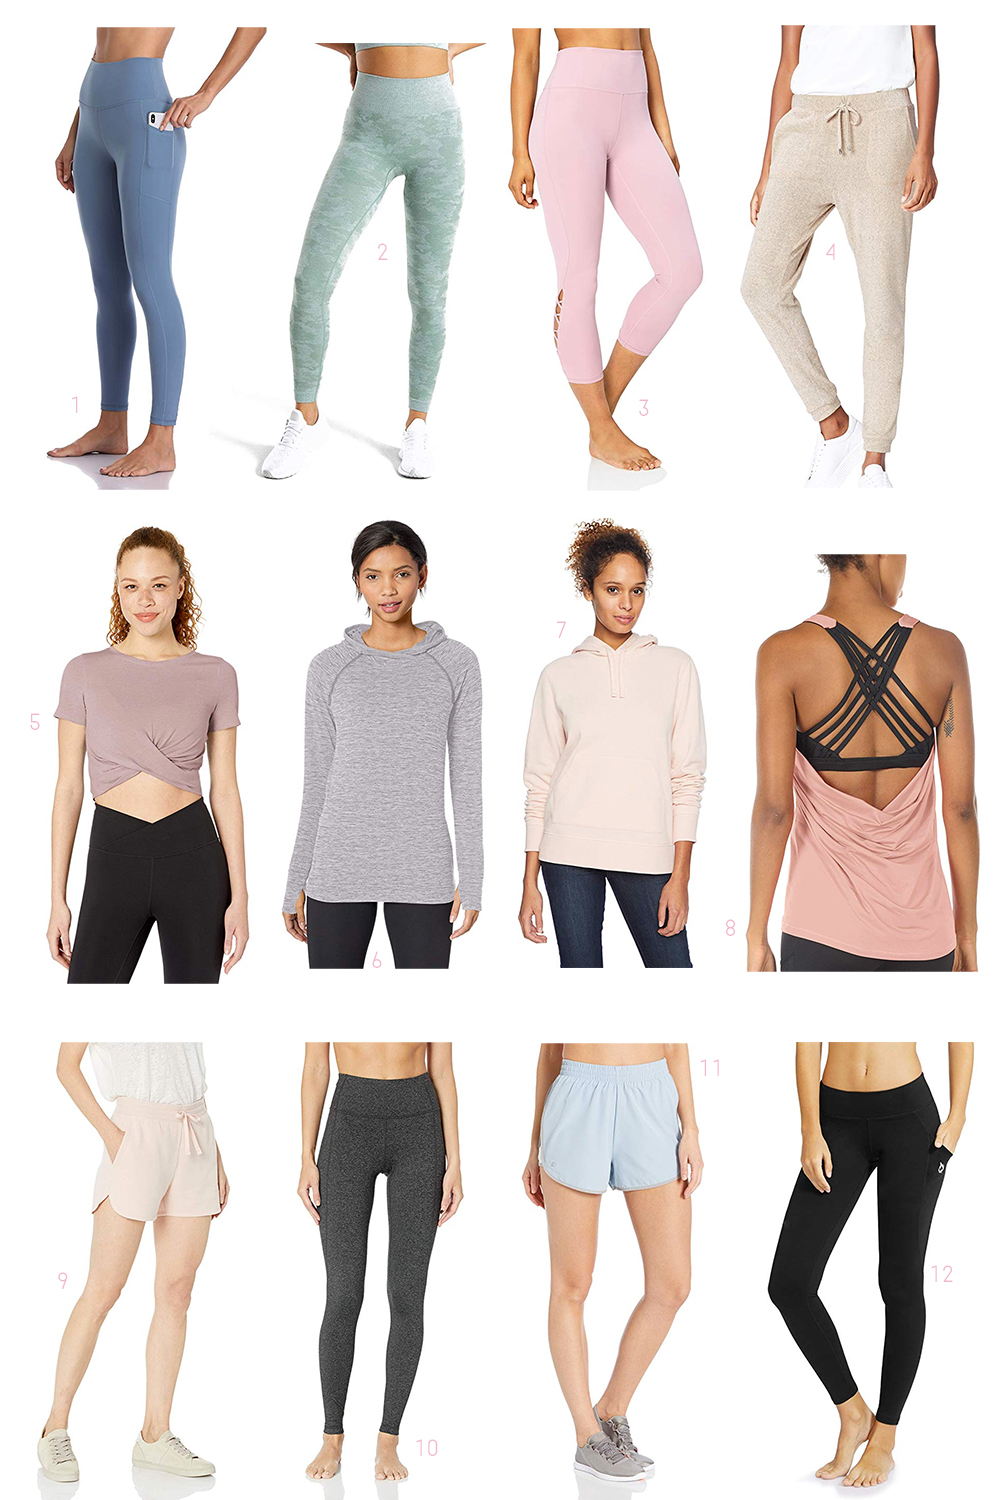 top prime day activewear deals, best prime day 2019 activewear deals, best prime day 2019 fashion deals, Best Prime Day 2019 Deals by popular affordable fashion blogger Stephanie Ziajka from Diary of a Debutante